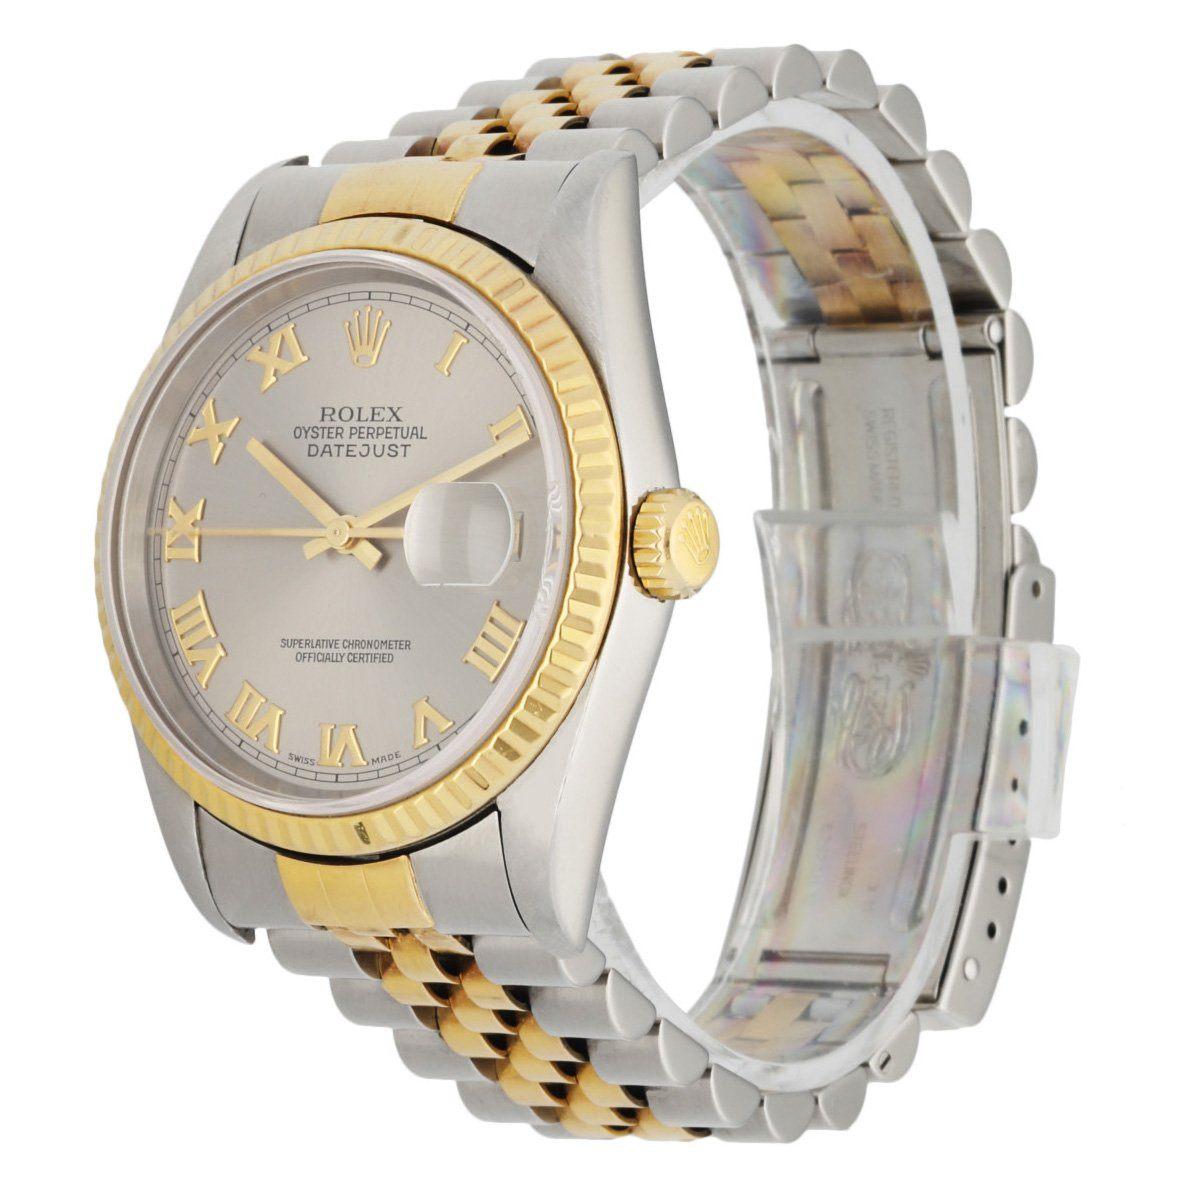 Rolex Datejust 16233 Men's Watch. 36mm Stainless Steel case. 18K Yellow GoldÂ fluted bezel. Silver dial with gold hands and gold Roman numeral hour markers. Minute markers on the outer dial. Date display at the 3 o'clock position. Stainless Steel &